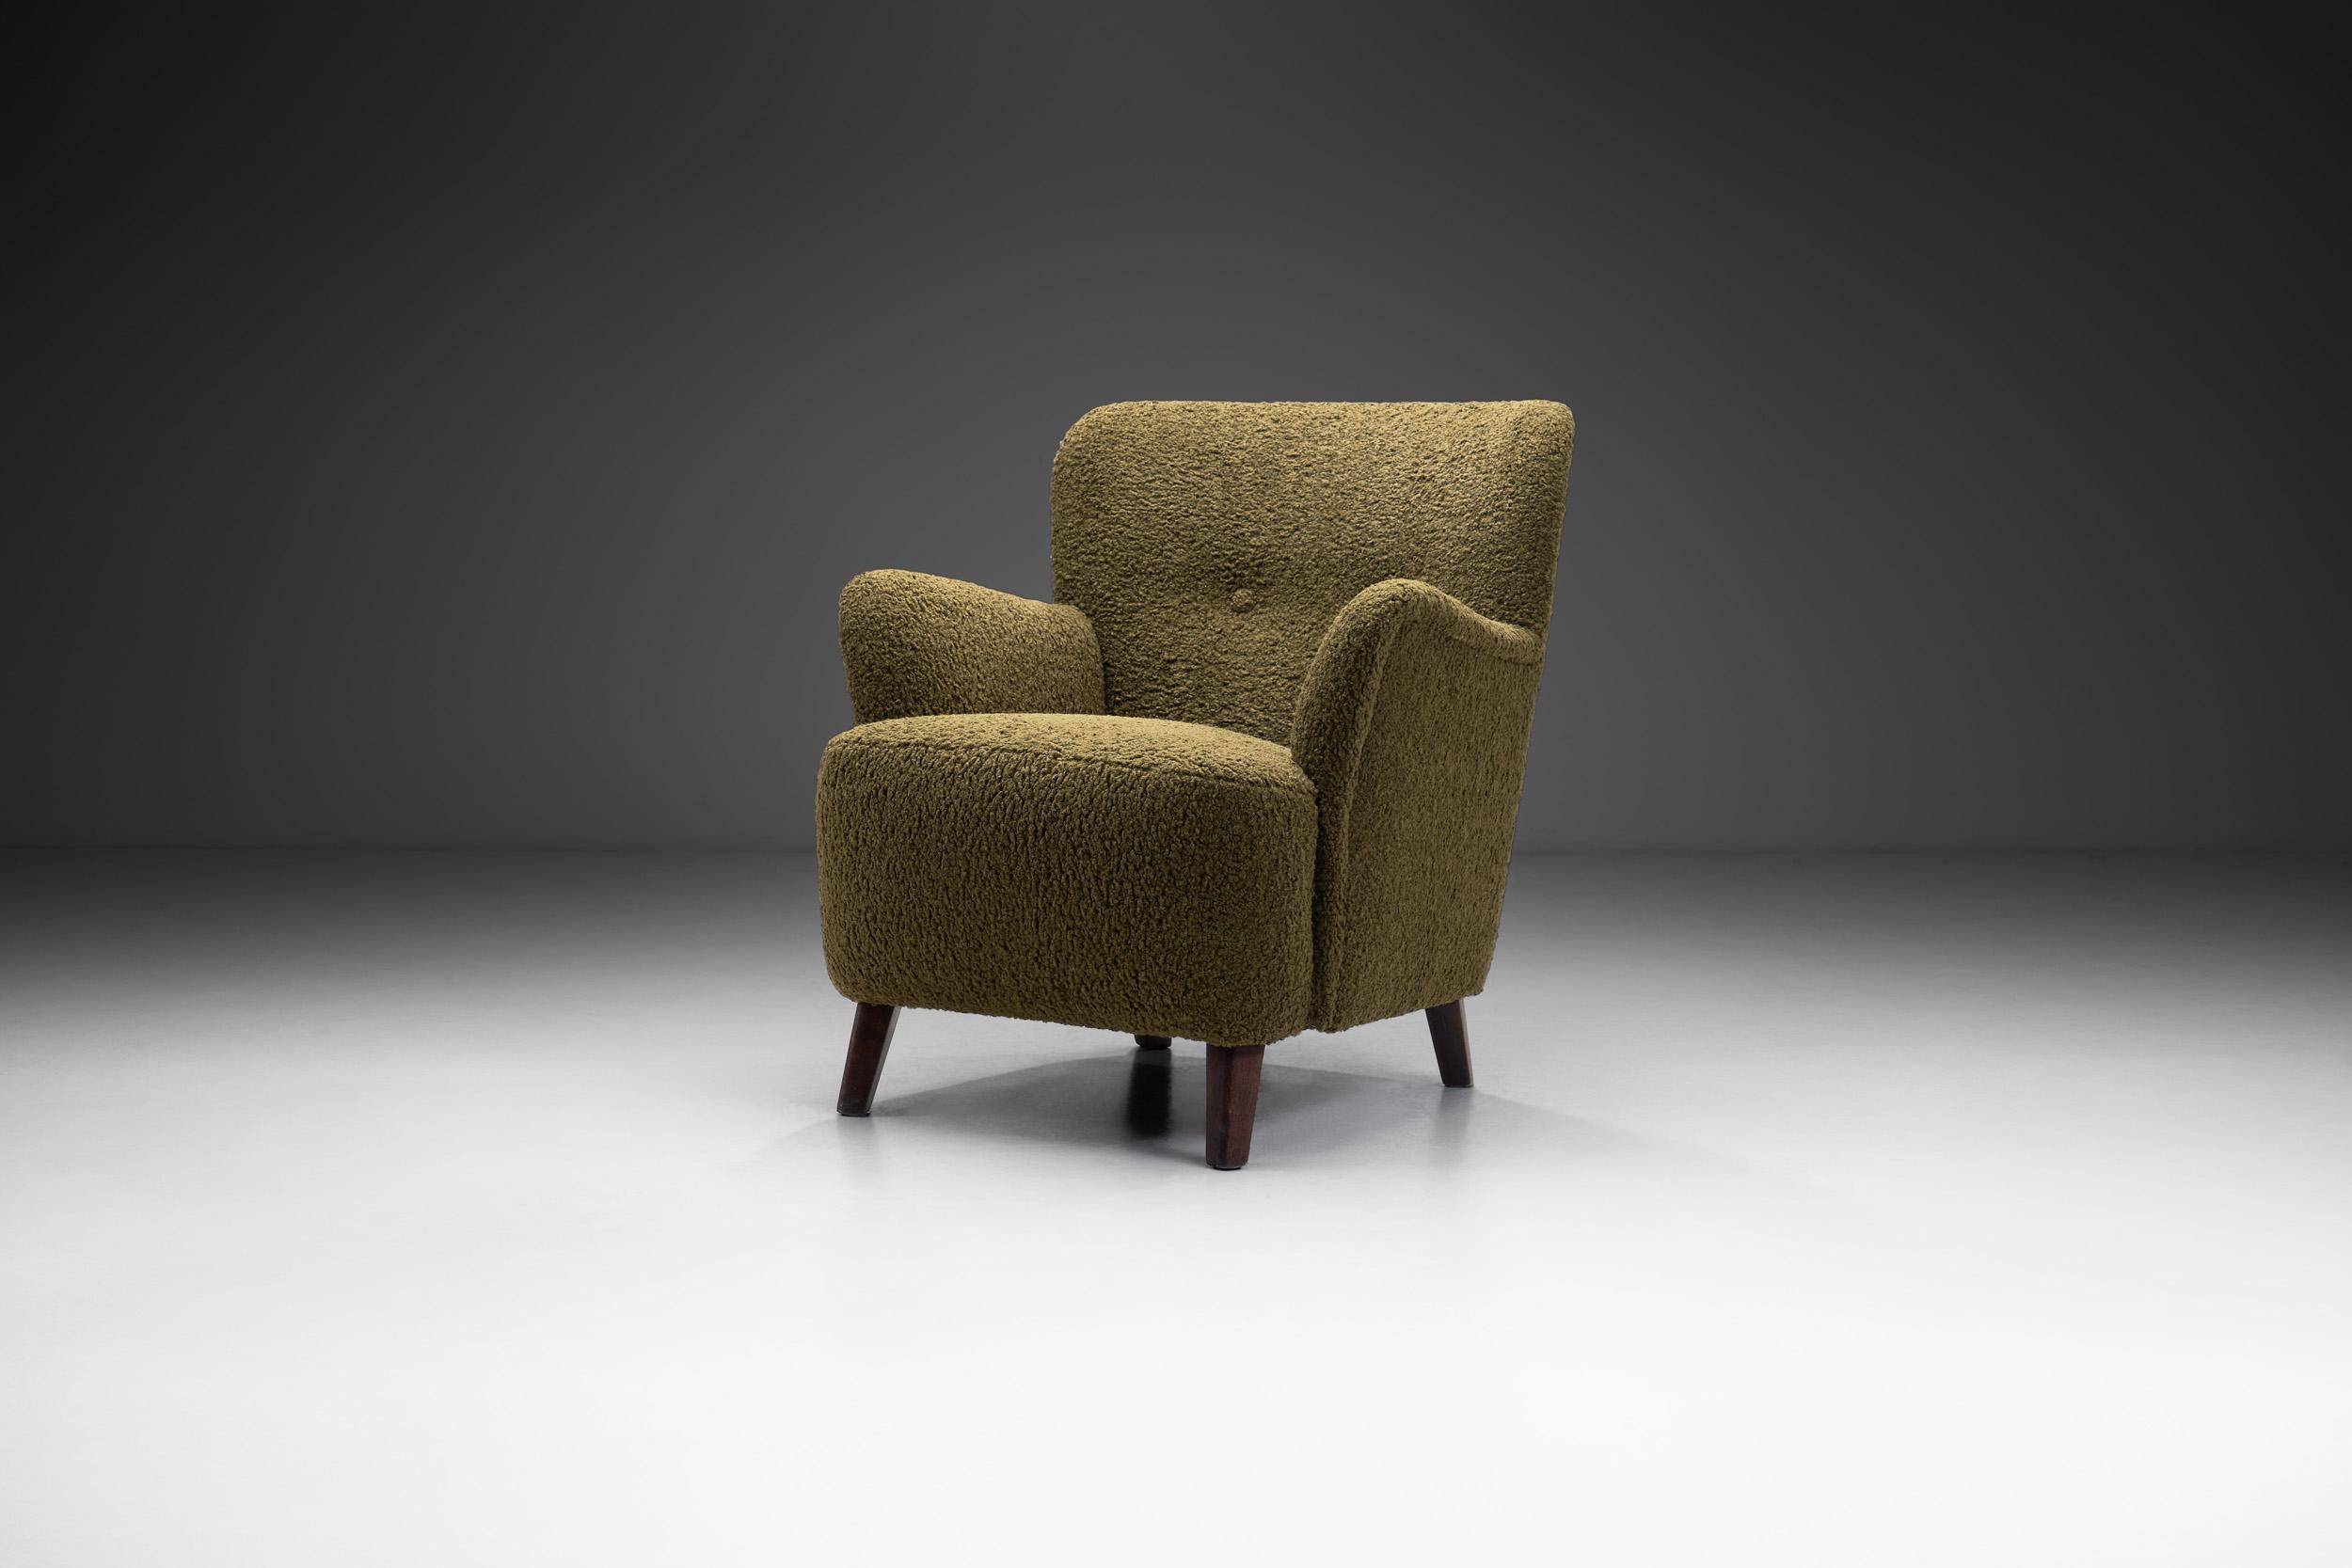 European Mid-Century Upholstered Olive Green Armchair, Europe Mid 20th Century For Sale